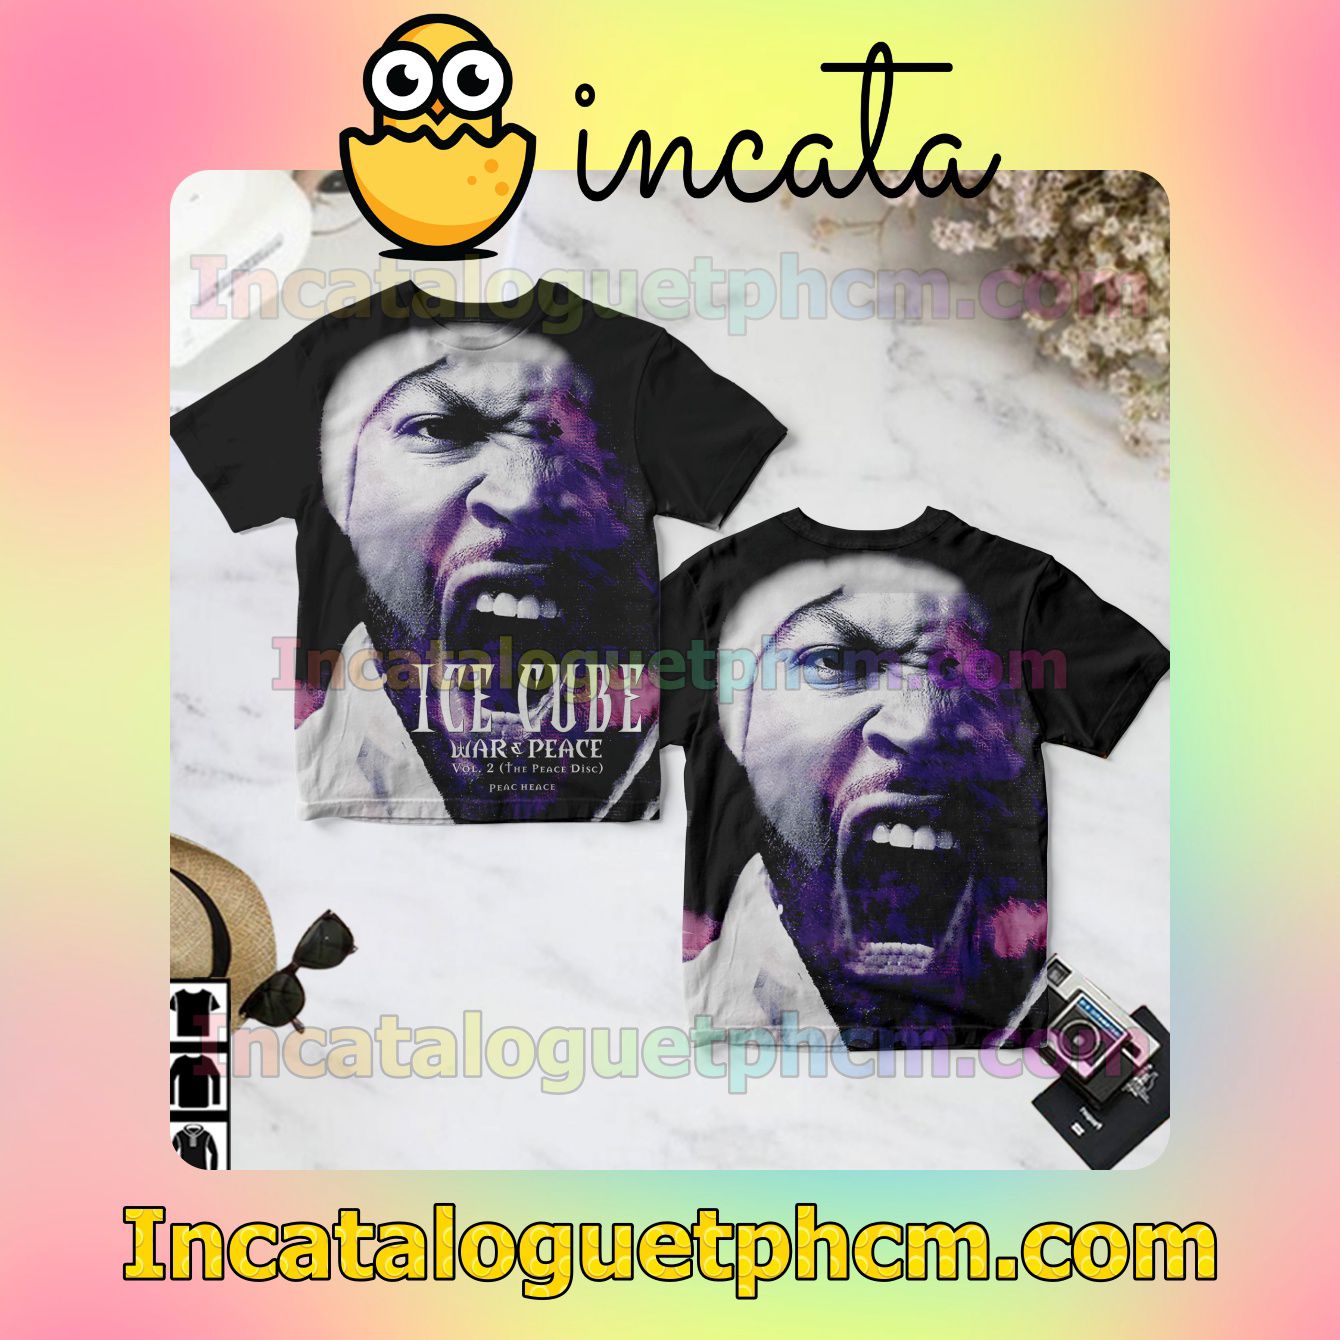 Ice Cube War And Peace Vol 2 Album Cover Fan Shirts